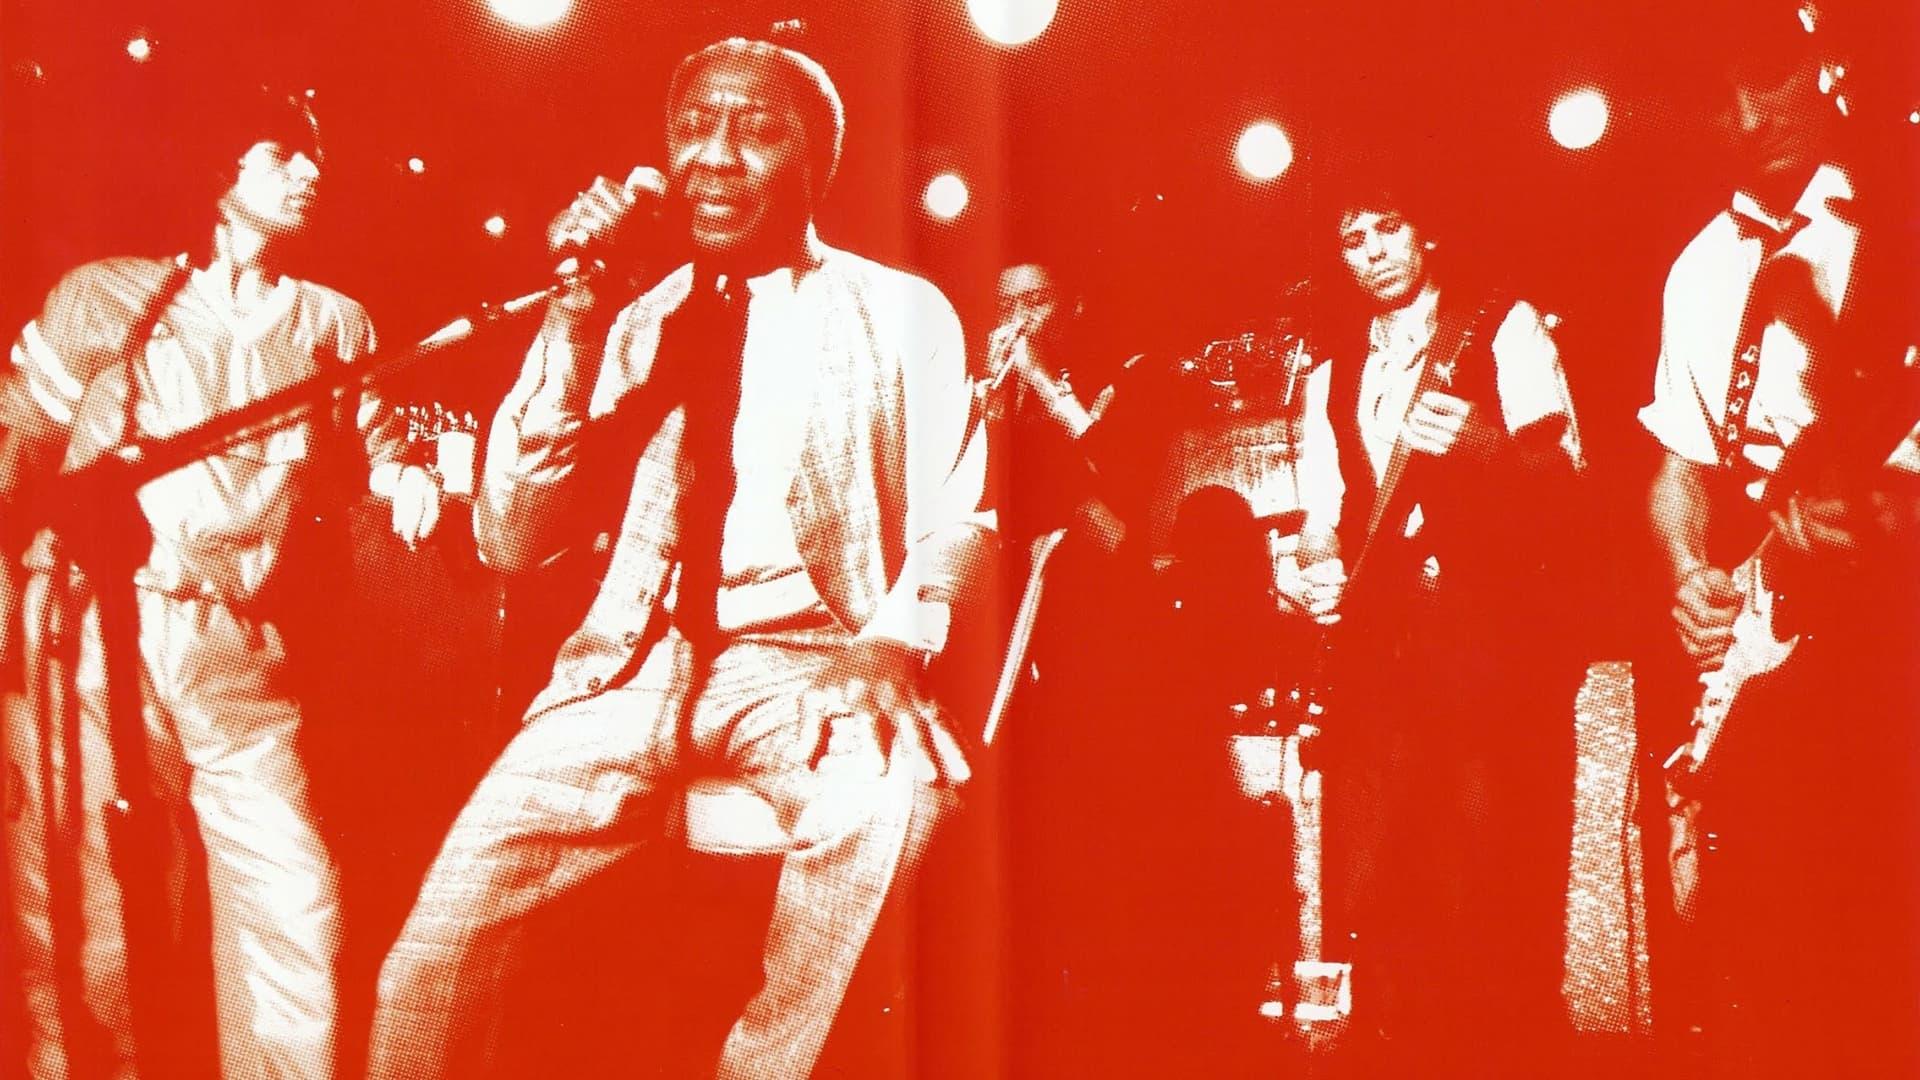 Muddy Waters and The Rolling Stones - Live at the Checkerboard Lounge backdrop